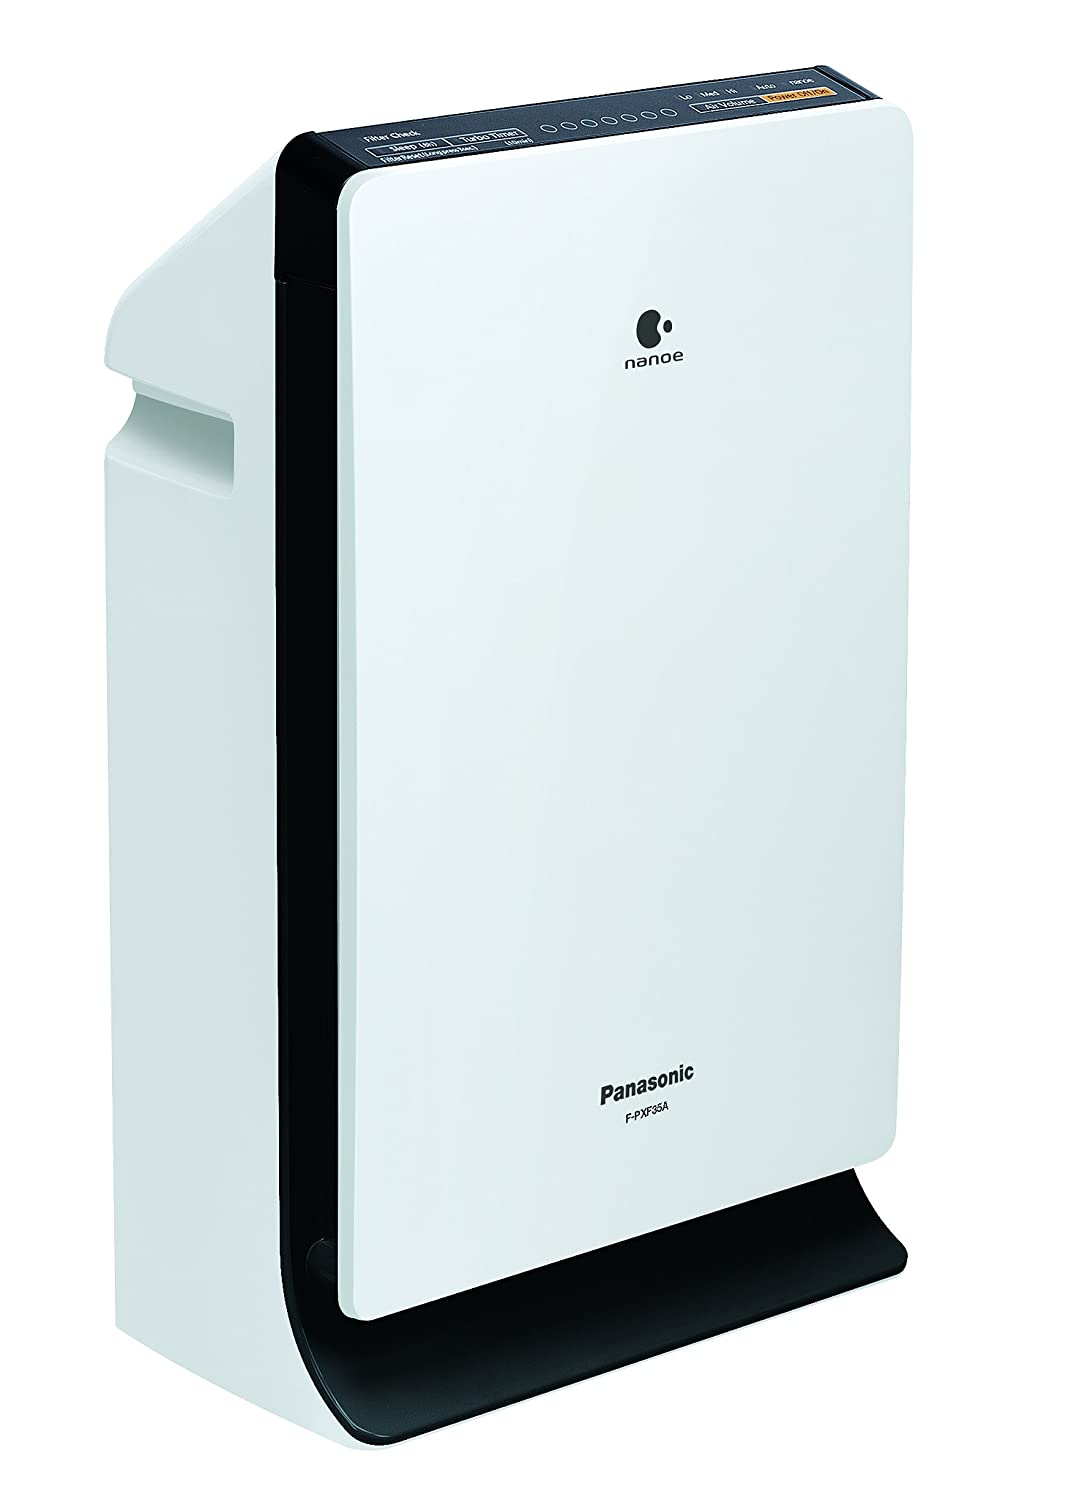 Panasonic F-PXF35MKU(D) can remove 17 kinds of viruses, bacteria, odours, and 99% allergens.